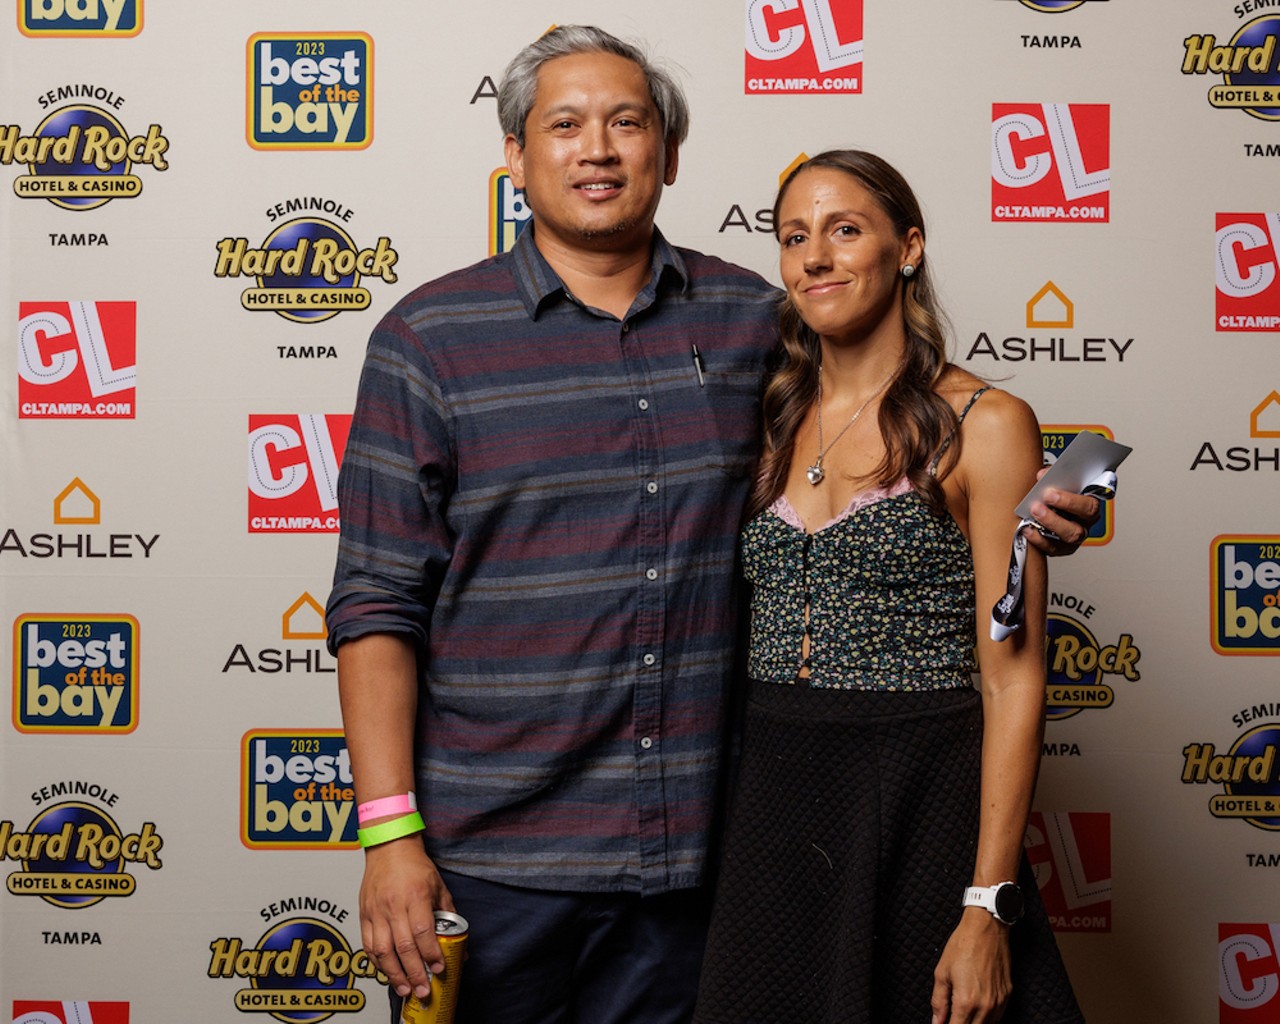 Everyone who stepped into Creative Loafing's Best of the Bay 2023 photo booth